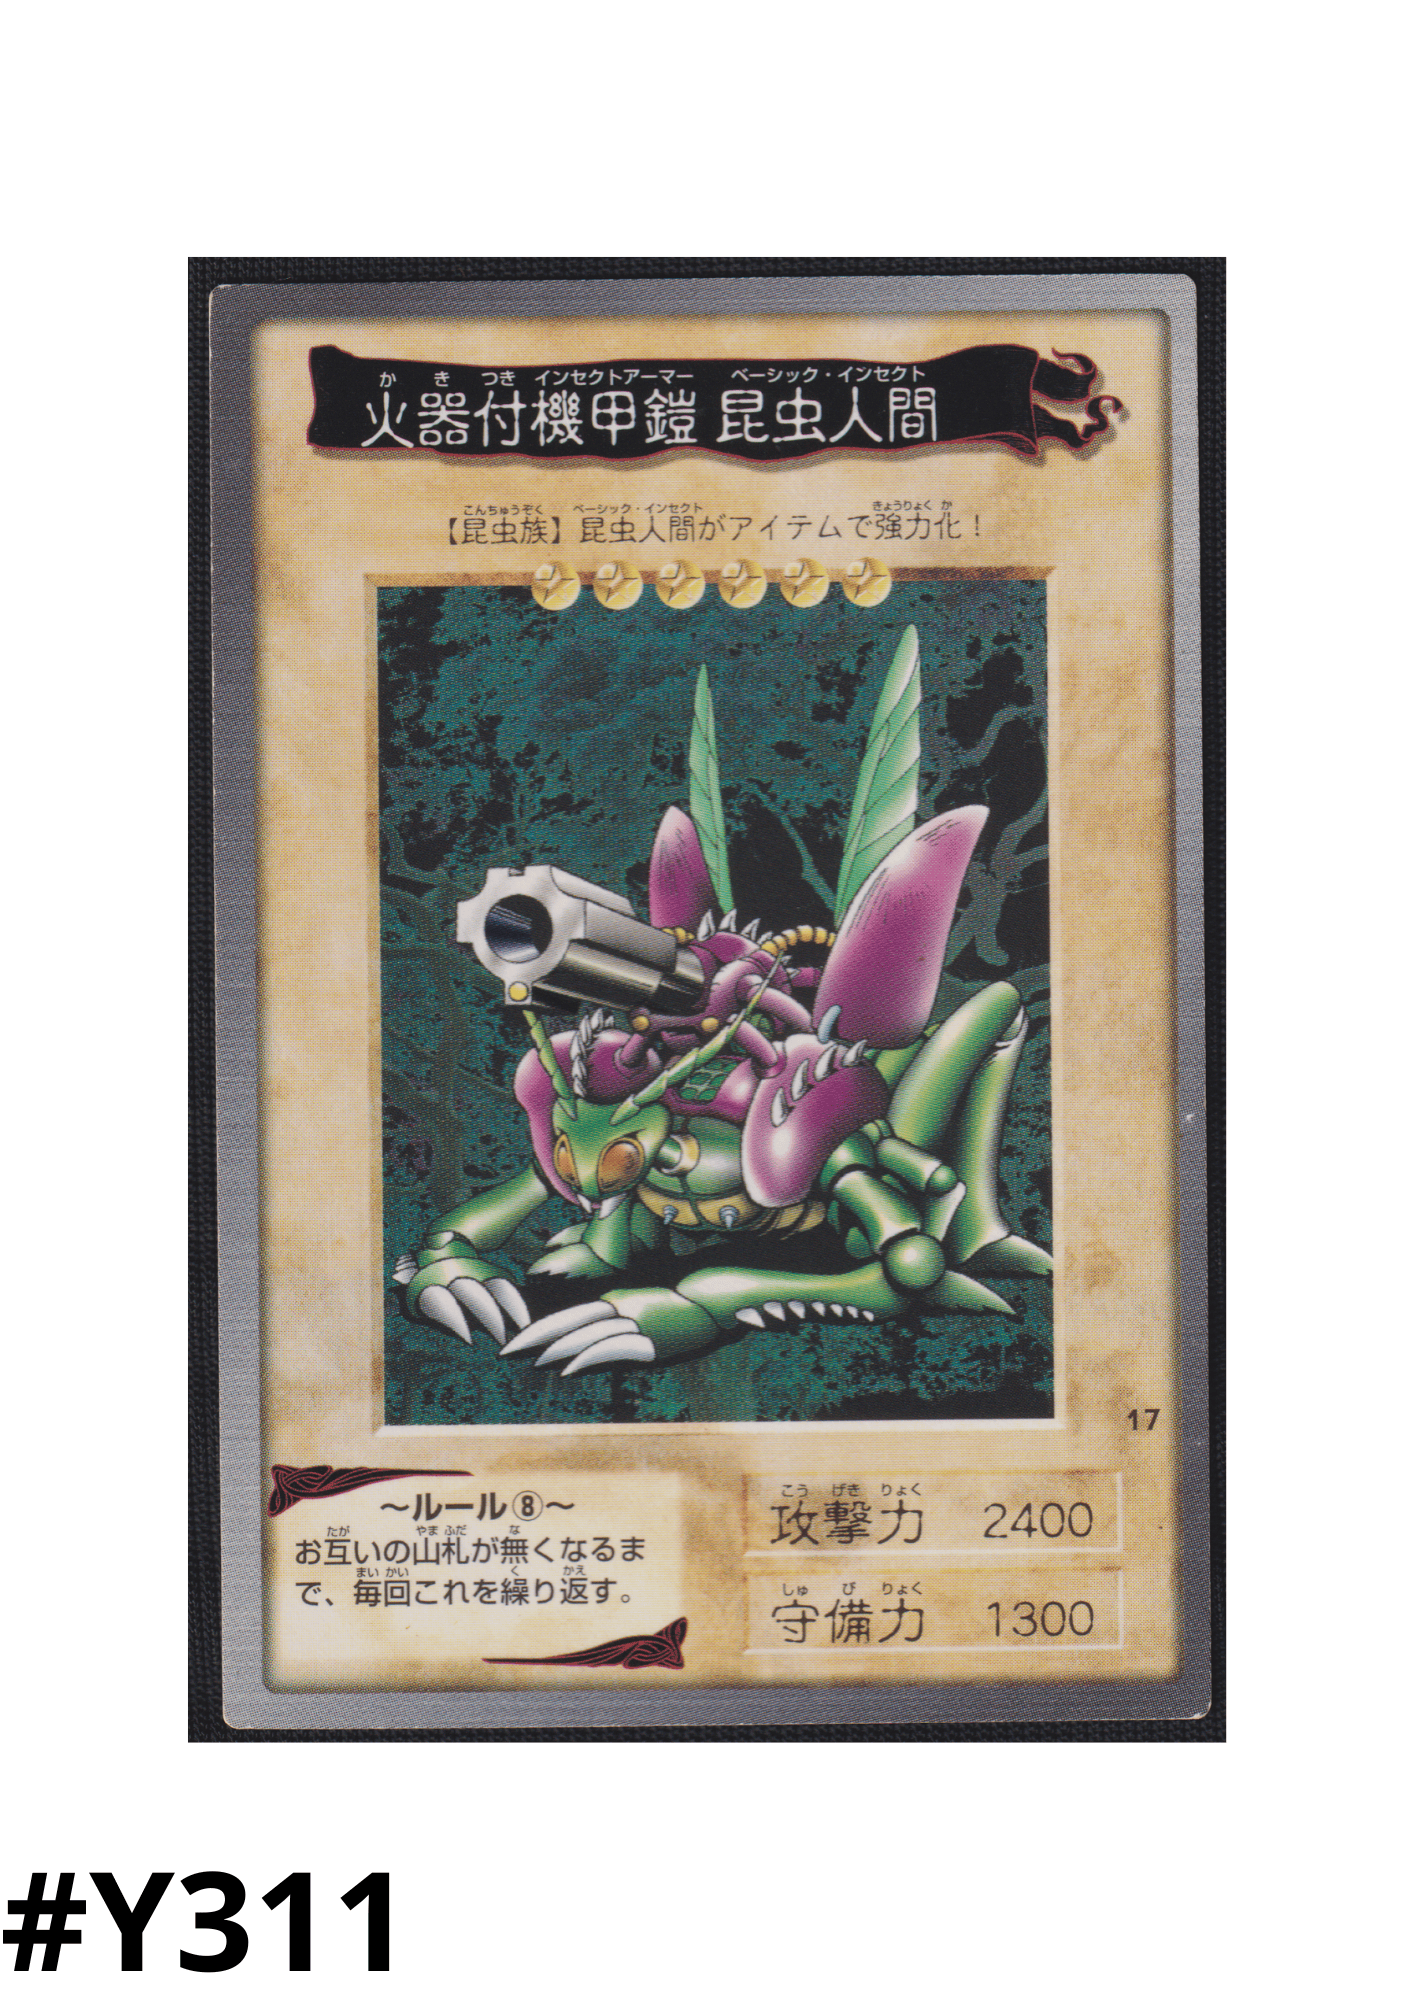 Yu Gi Oh! | Bandai Card No.17 | Armored Basic Insect with Laser Cannon ChitoroShop